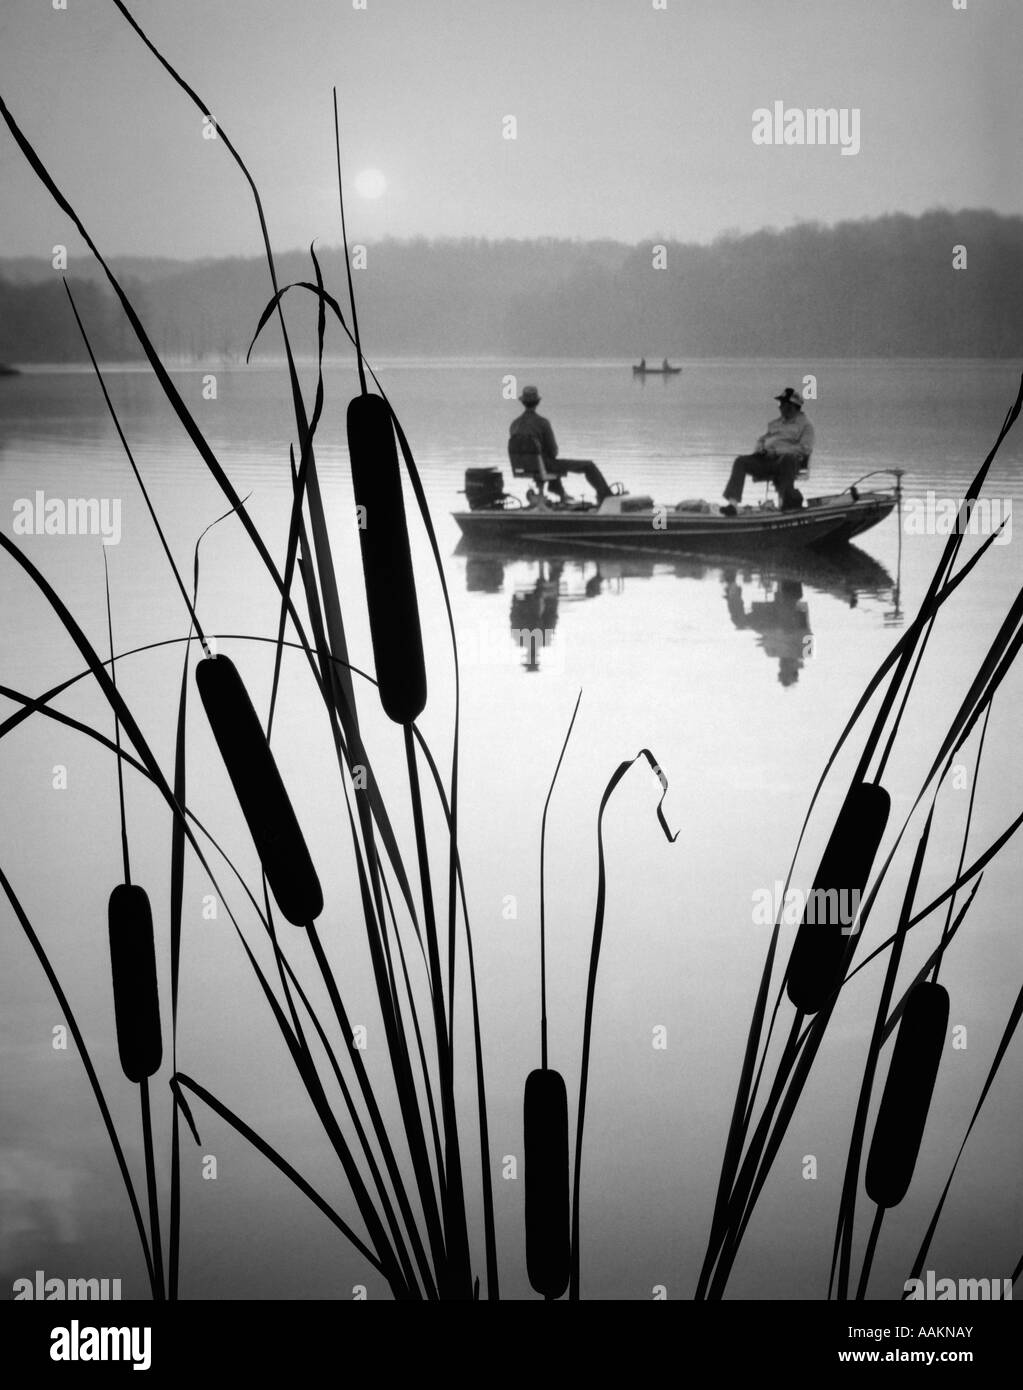 1980s TWO MEN IN BASS FISHING BOAT ON CALM WATER LAKE CATTAILS IN FOREGROUND Stock Photo